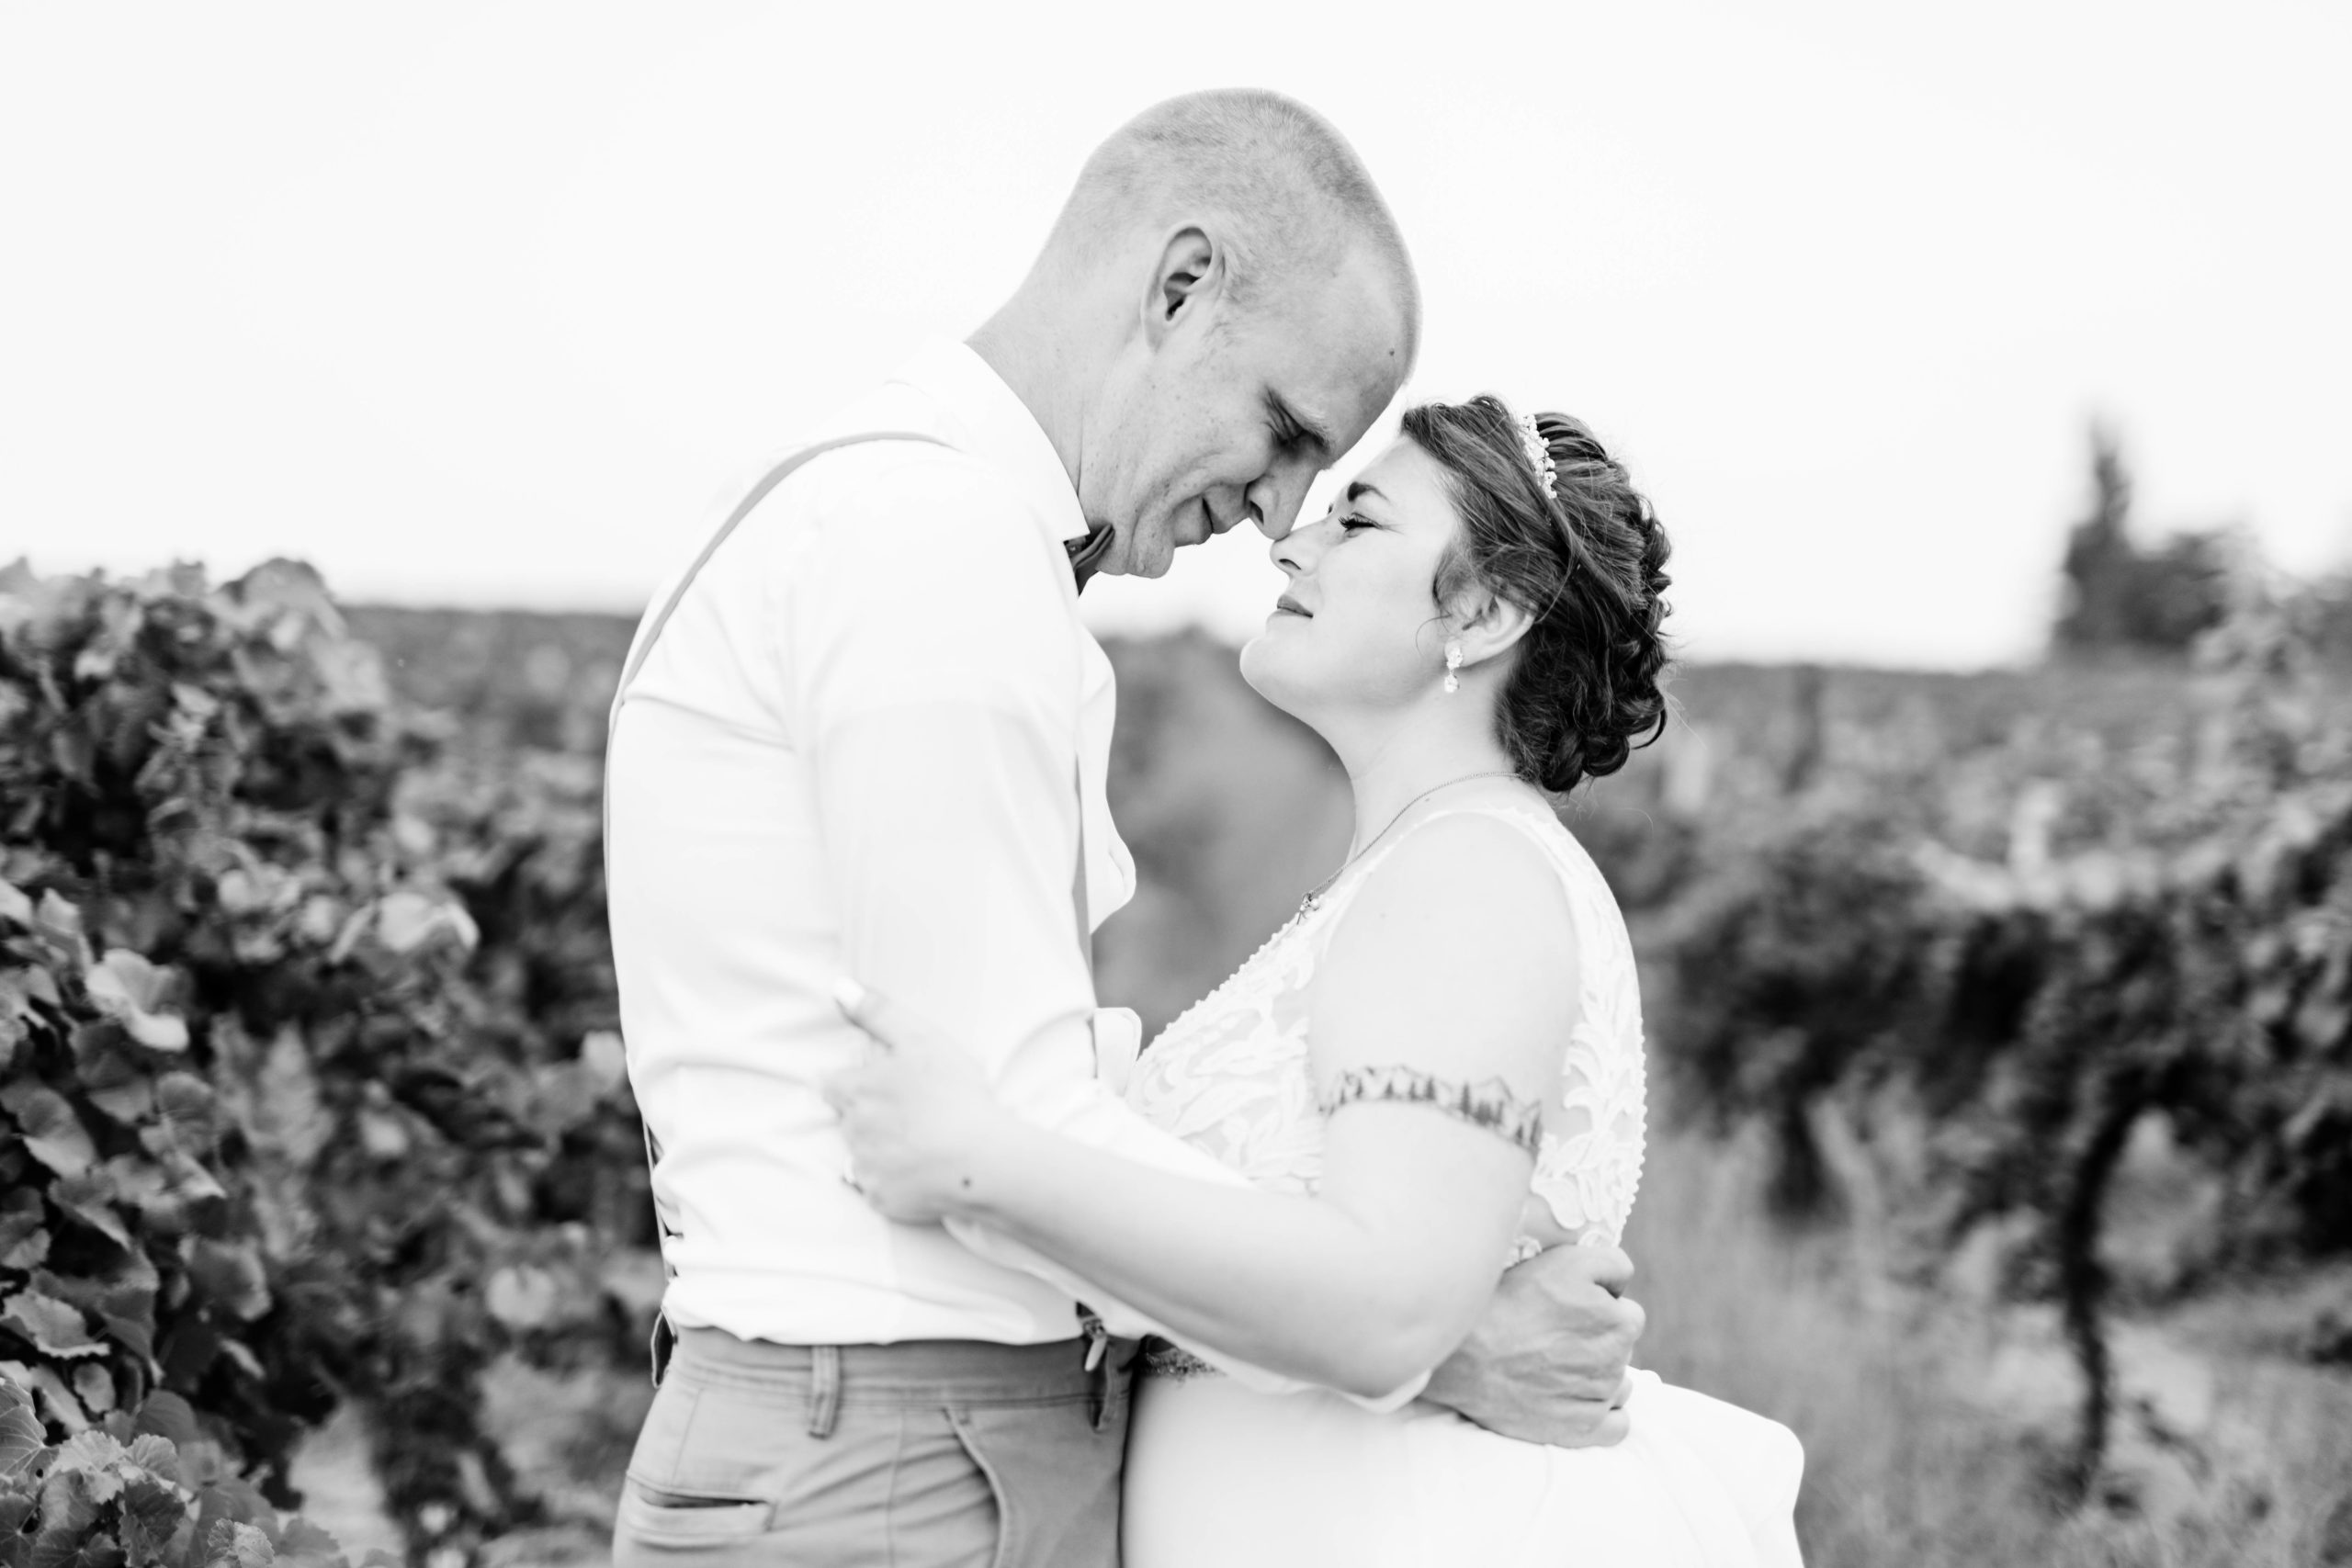 black and white wedding photos with bride and groom embracing are their foreheads and noses touch for a romantic summer wedding photo